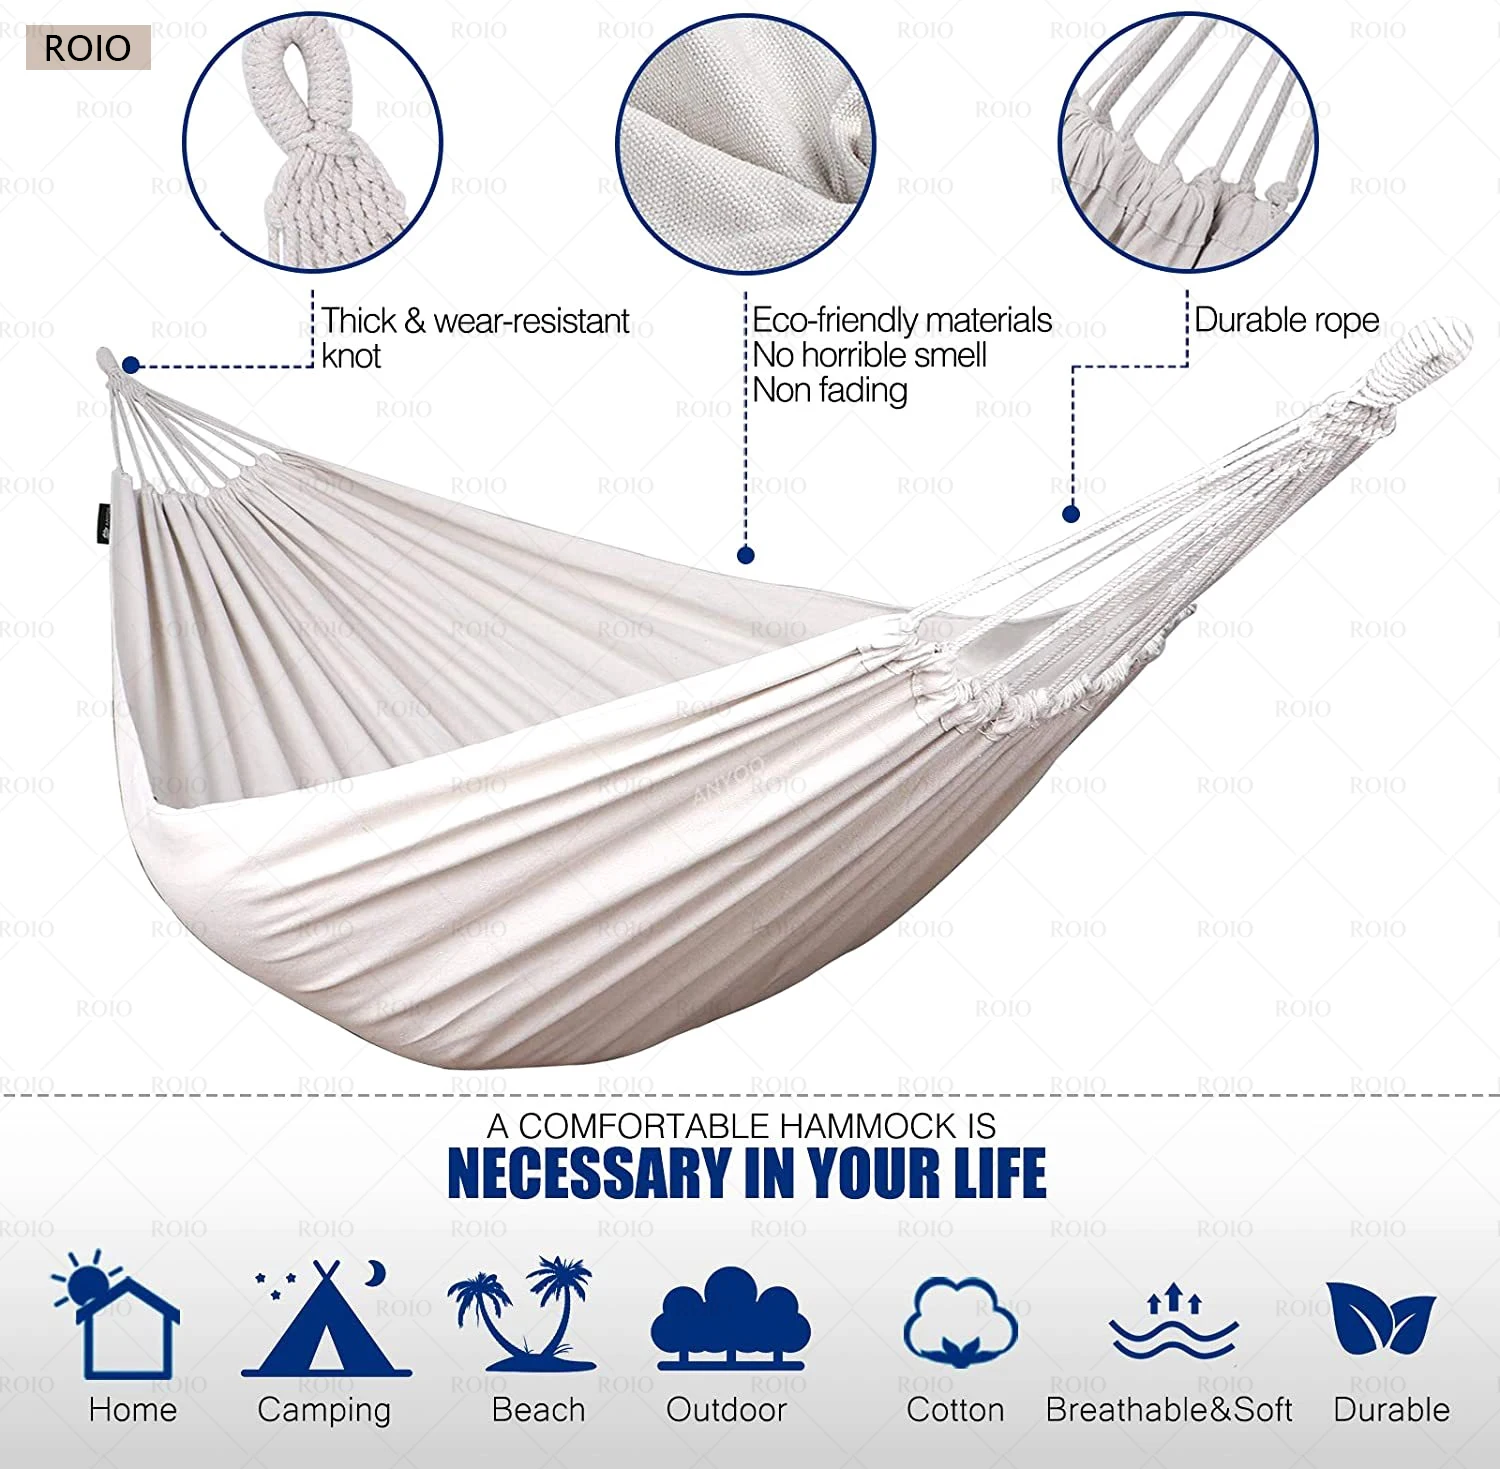 Camping Hammock 1-2 People Travel Beach Portable Rest Hanging Bed Chair Furniture Home Garden Pool Swing Outdoor Hammock 2022